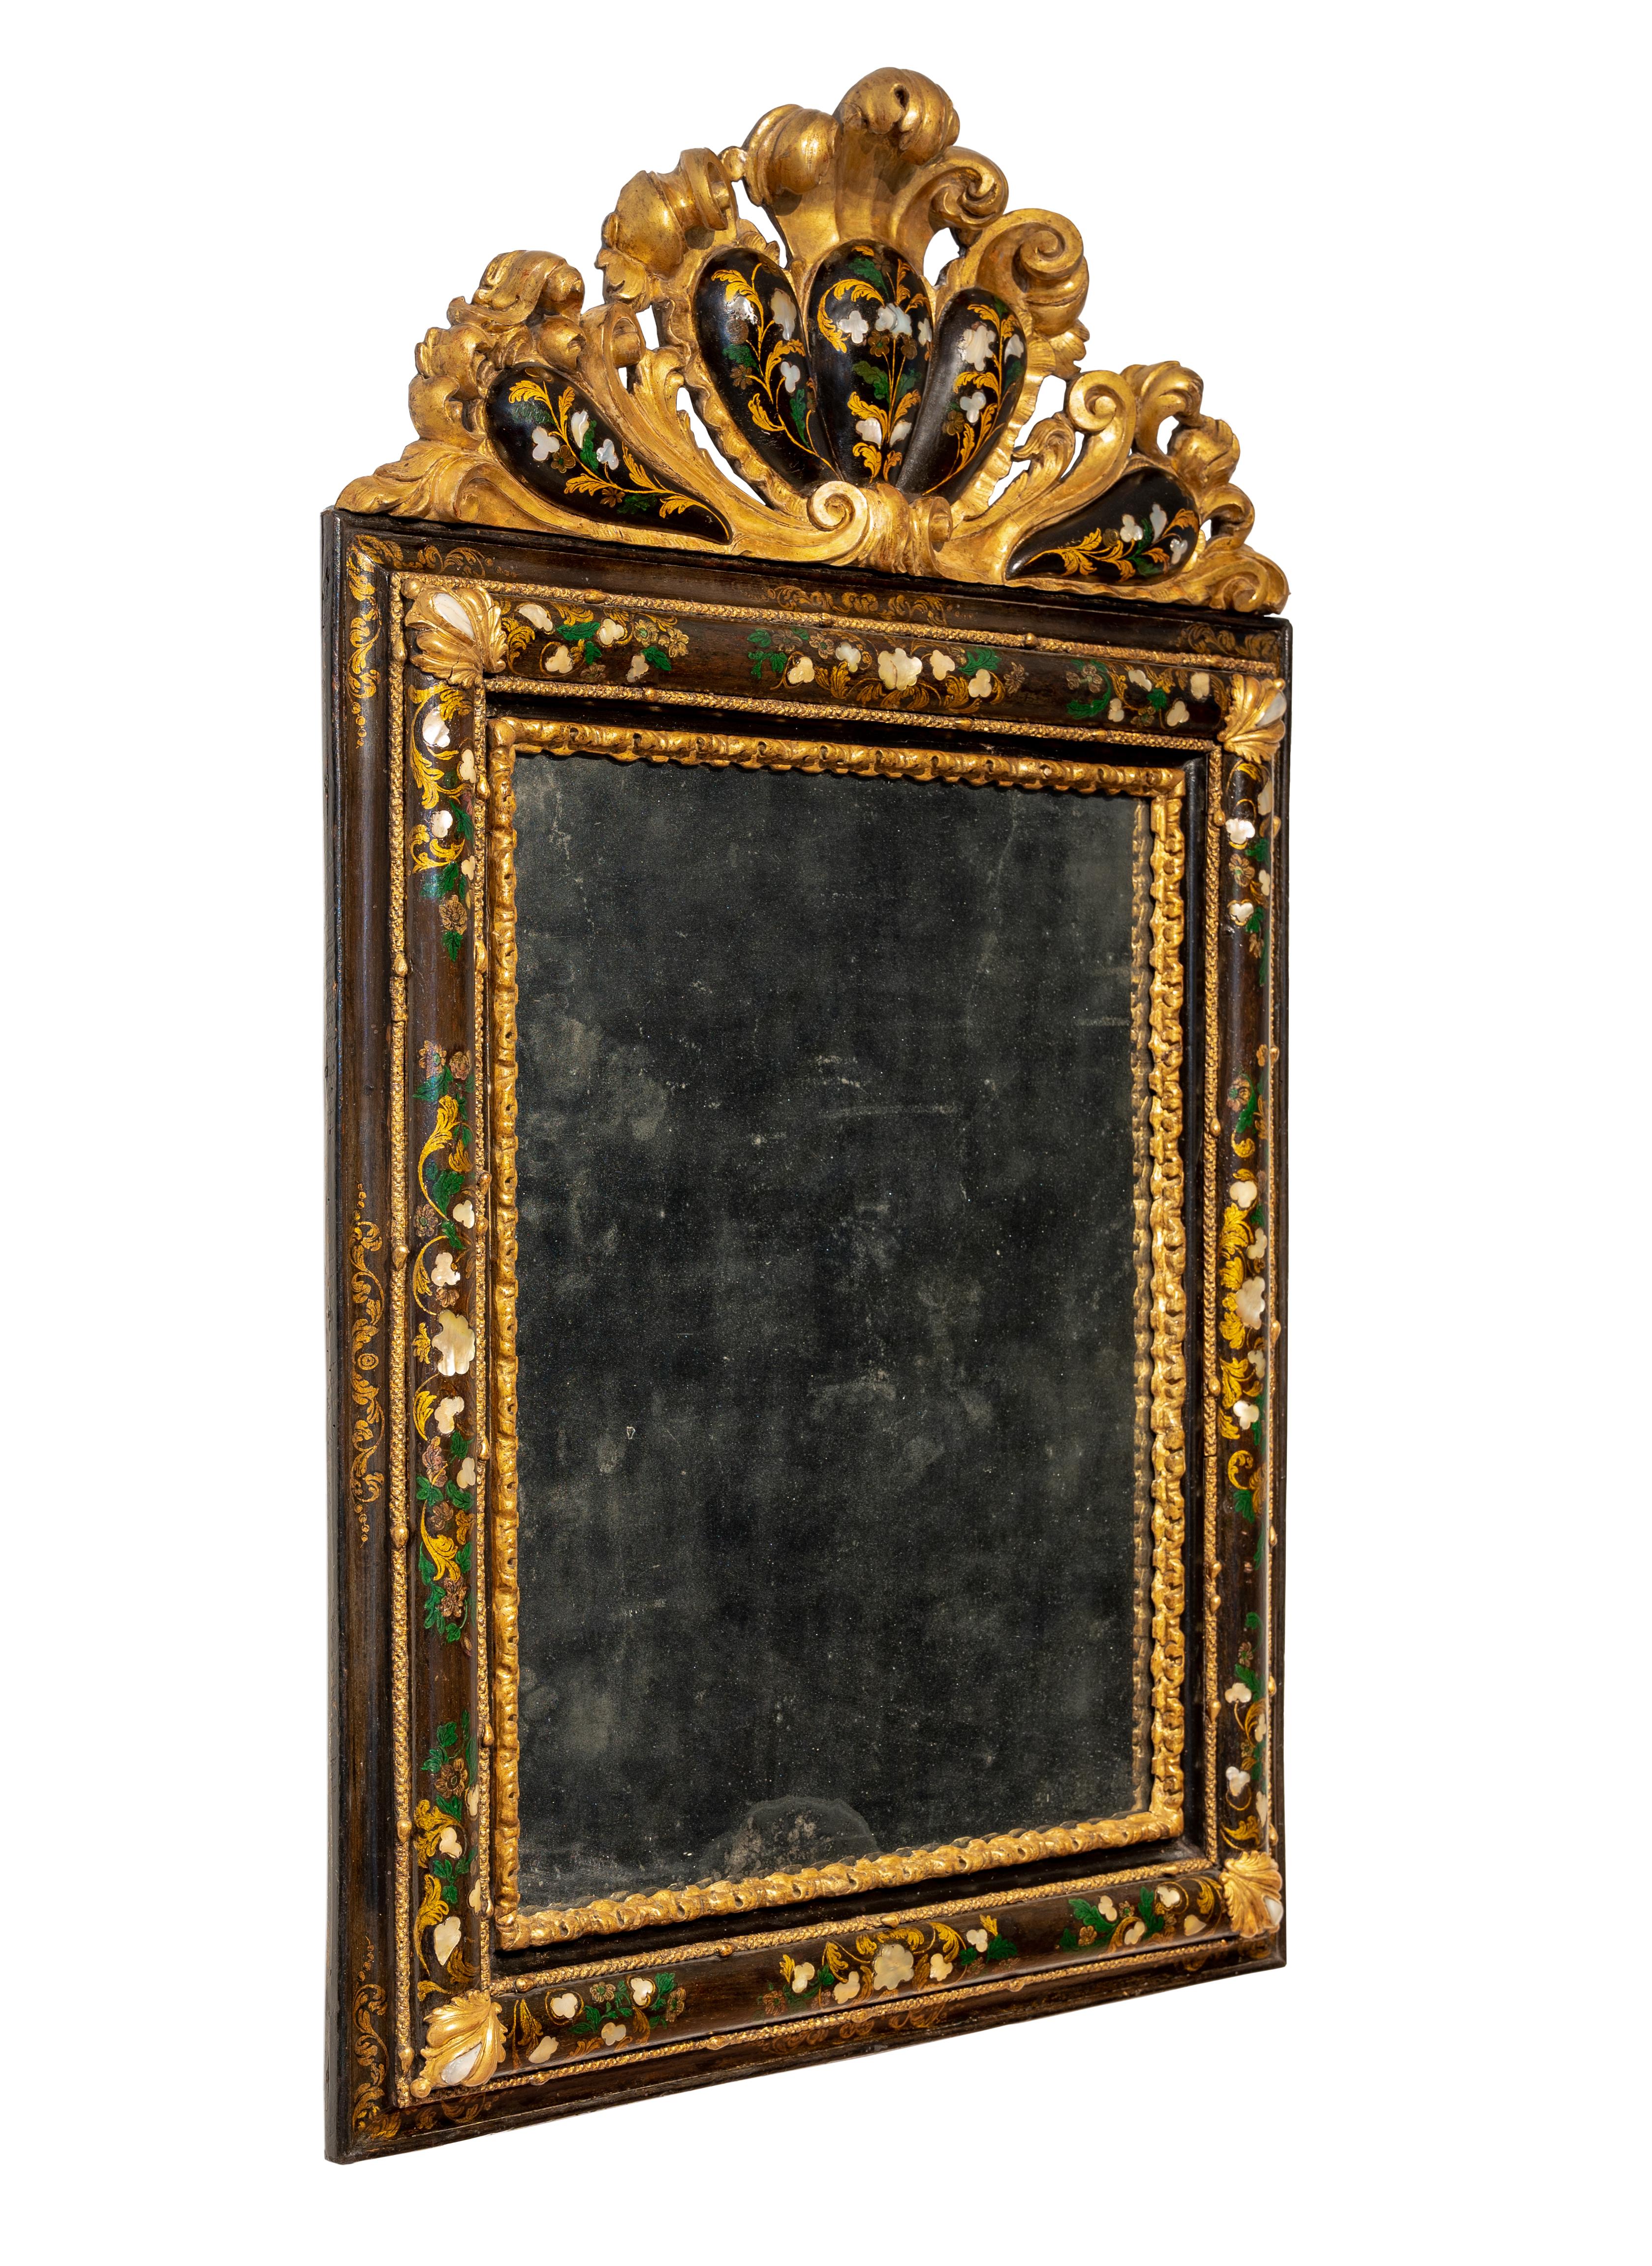 Extraordinary venetian mirror in carved, lacquered and gilded wood. Slightly rounded band with foliate decorations in polychrome lacquer and mother-of-pearl inlays, carved and foliated friezes at the corners, shaped, rounded cymatium, also gilded